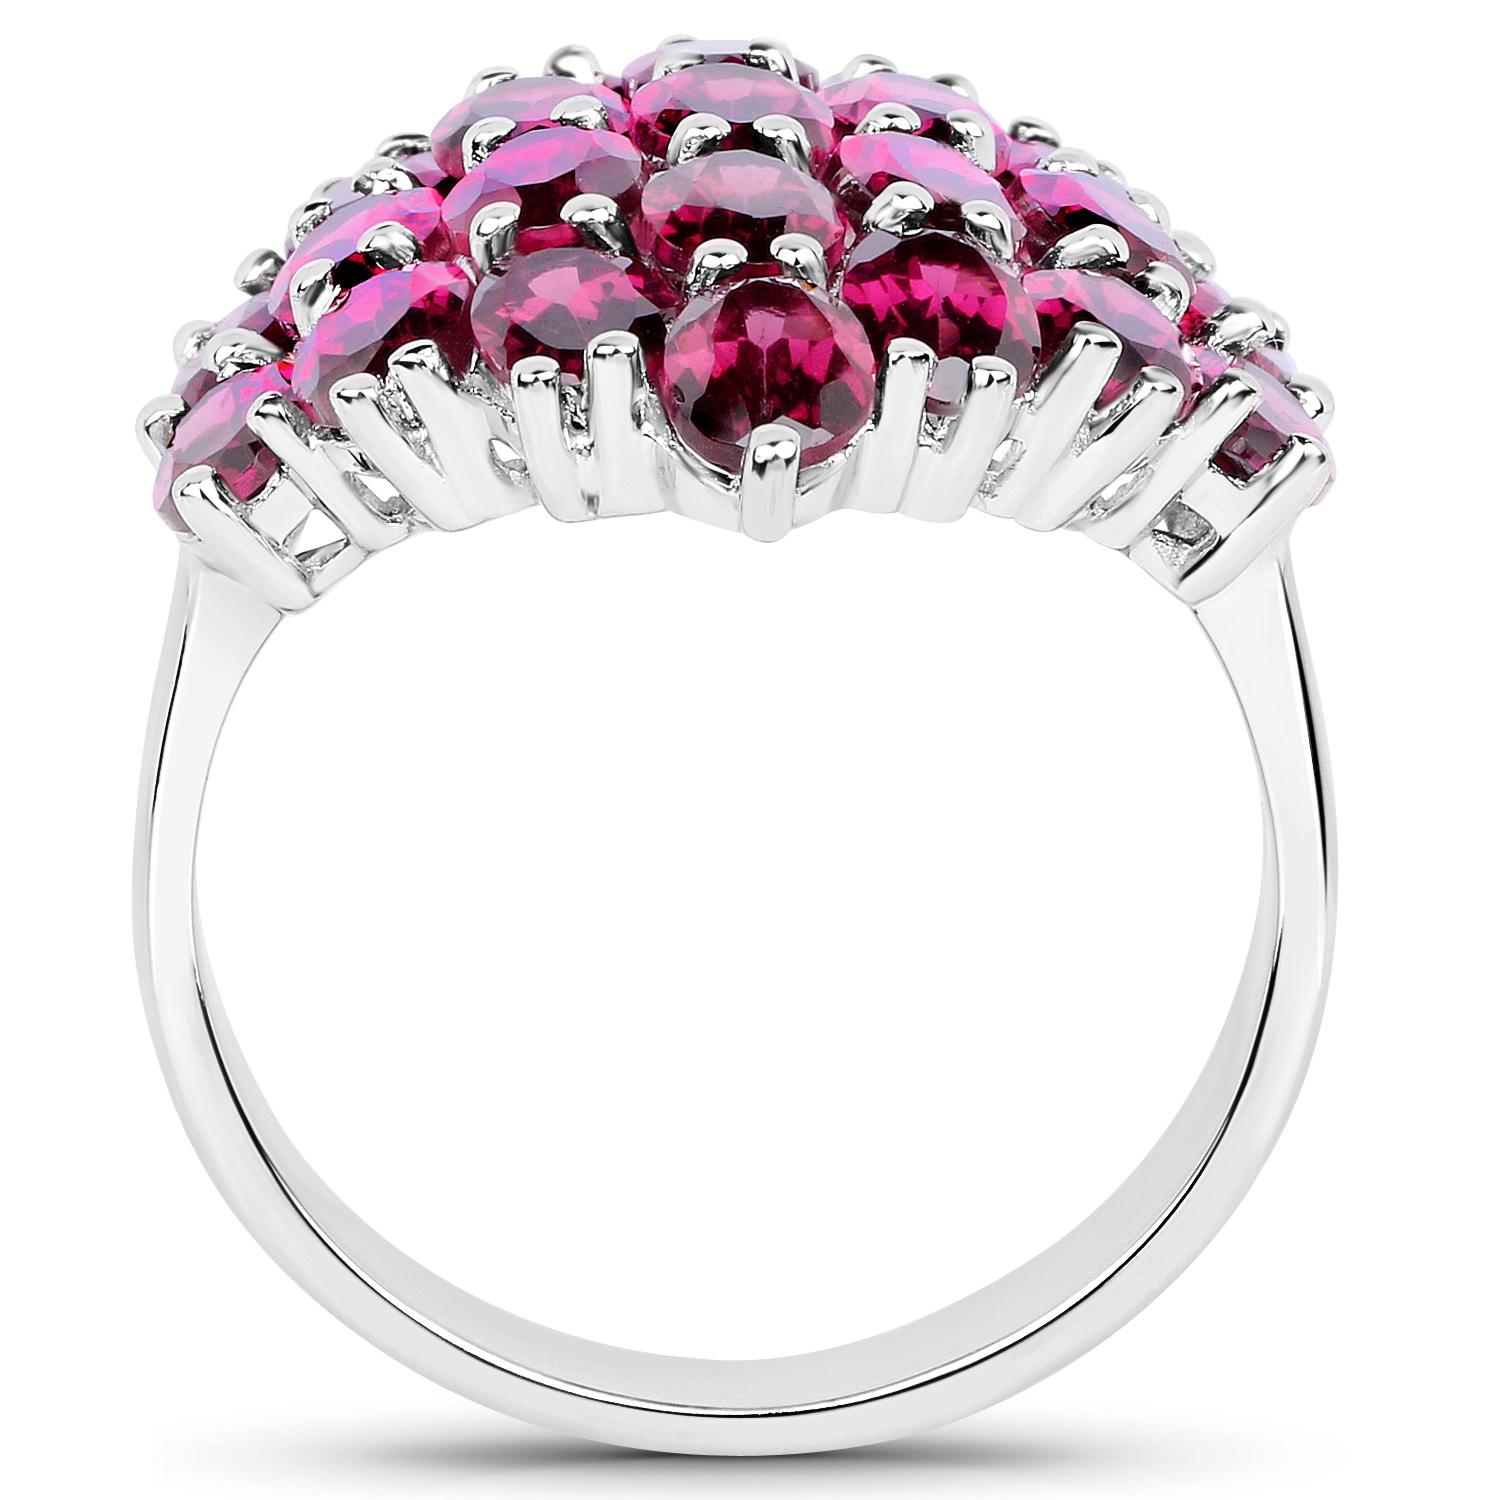 Rhodolite Cluster Pomegranate Ring 11.5 Carats In Excellent Condition For Sale In Laguna Niguel, CA